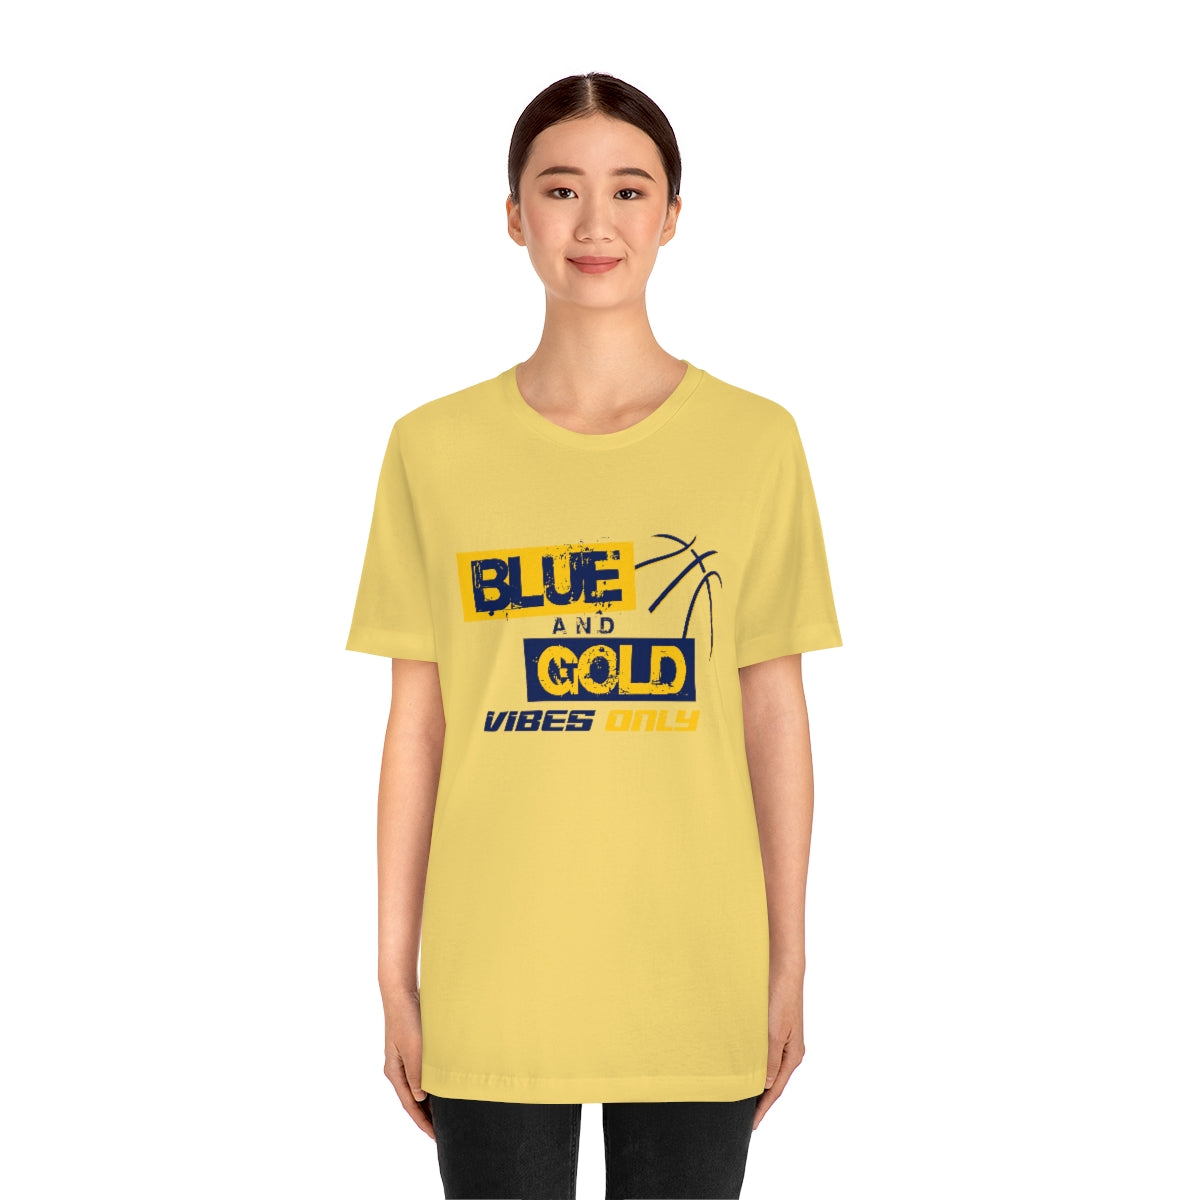 Blue & Gold Vibes Only Short Sleeve Tee